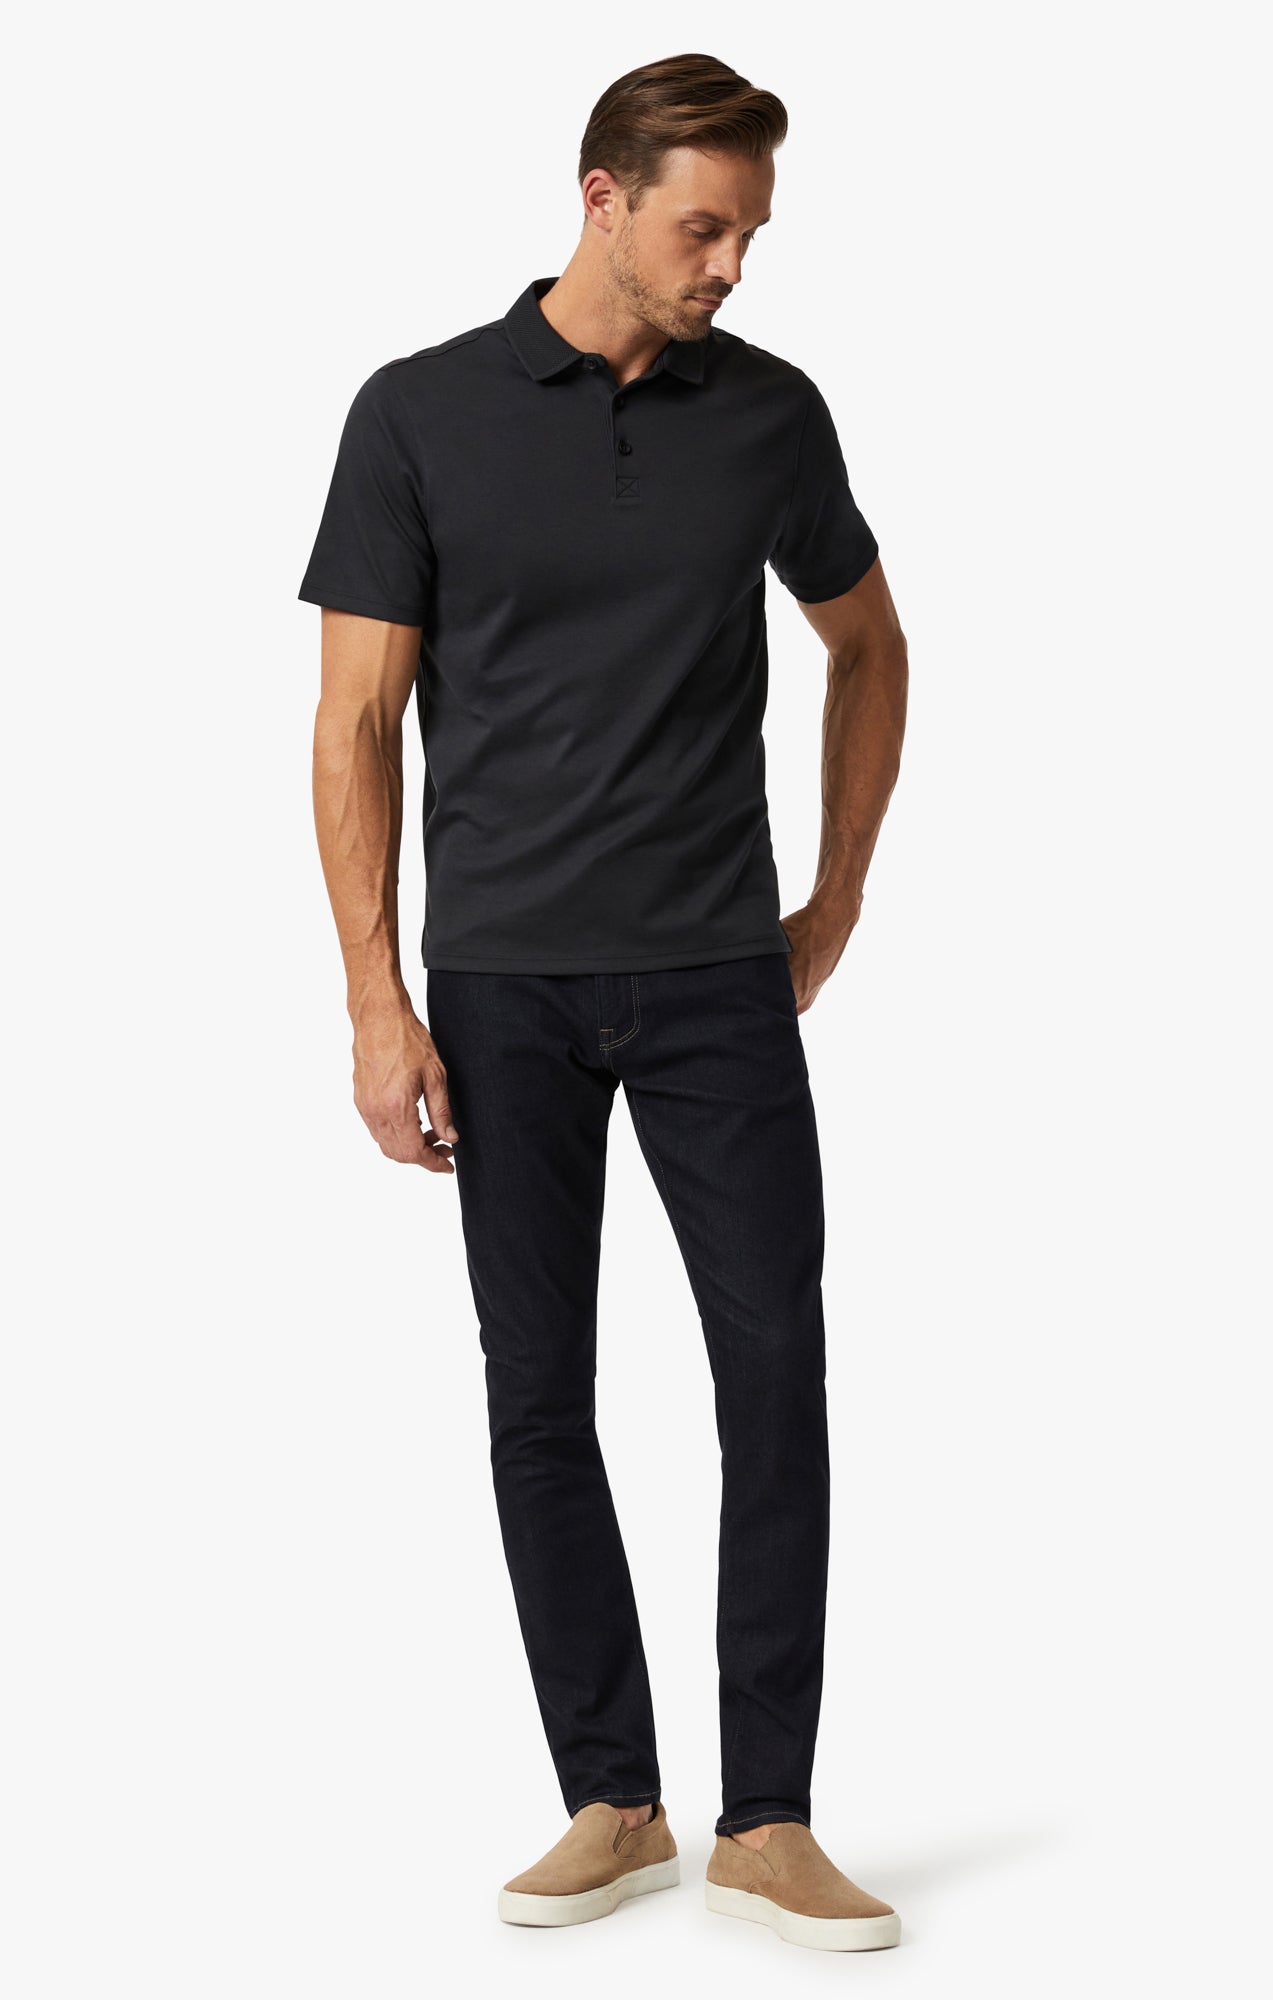 Polo T-Shirt In Black Image 4